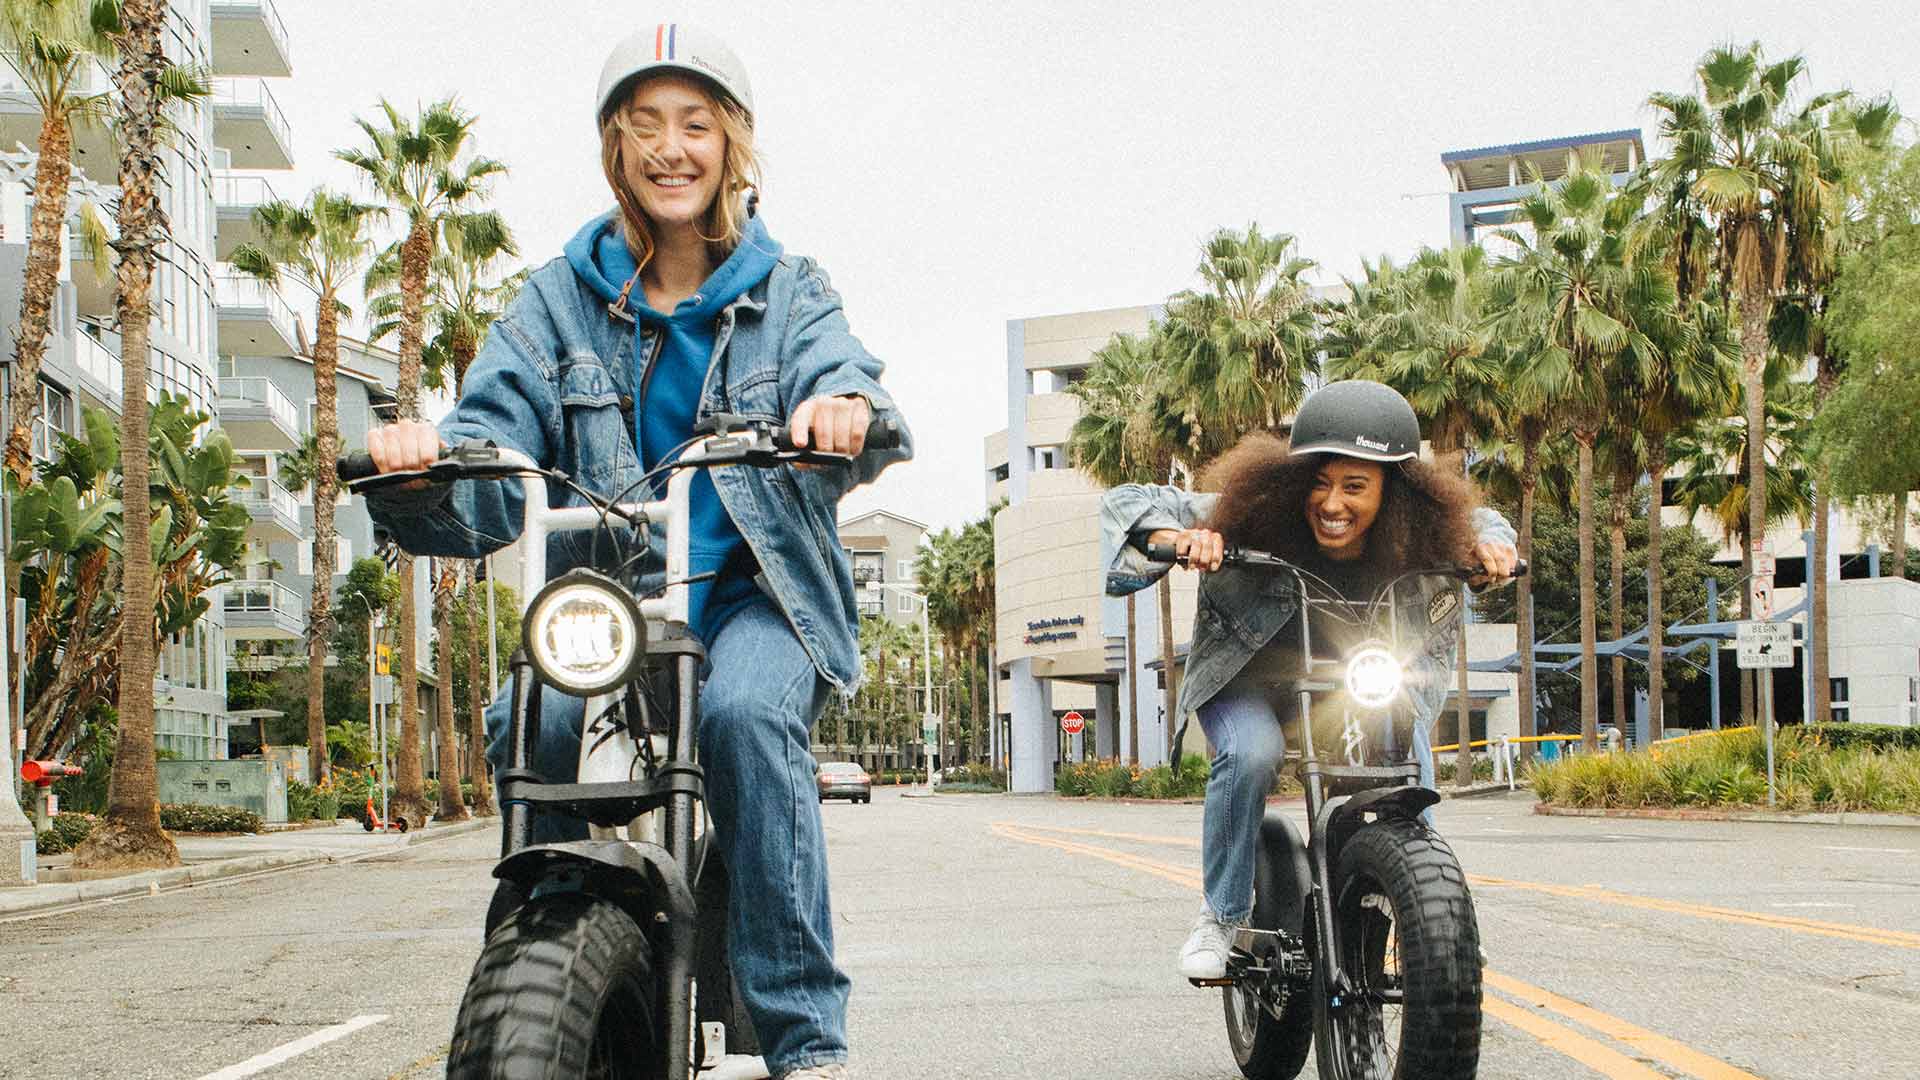 Two female SUPER73 electric bike owners ride down the street together smiling.